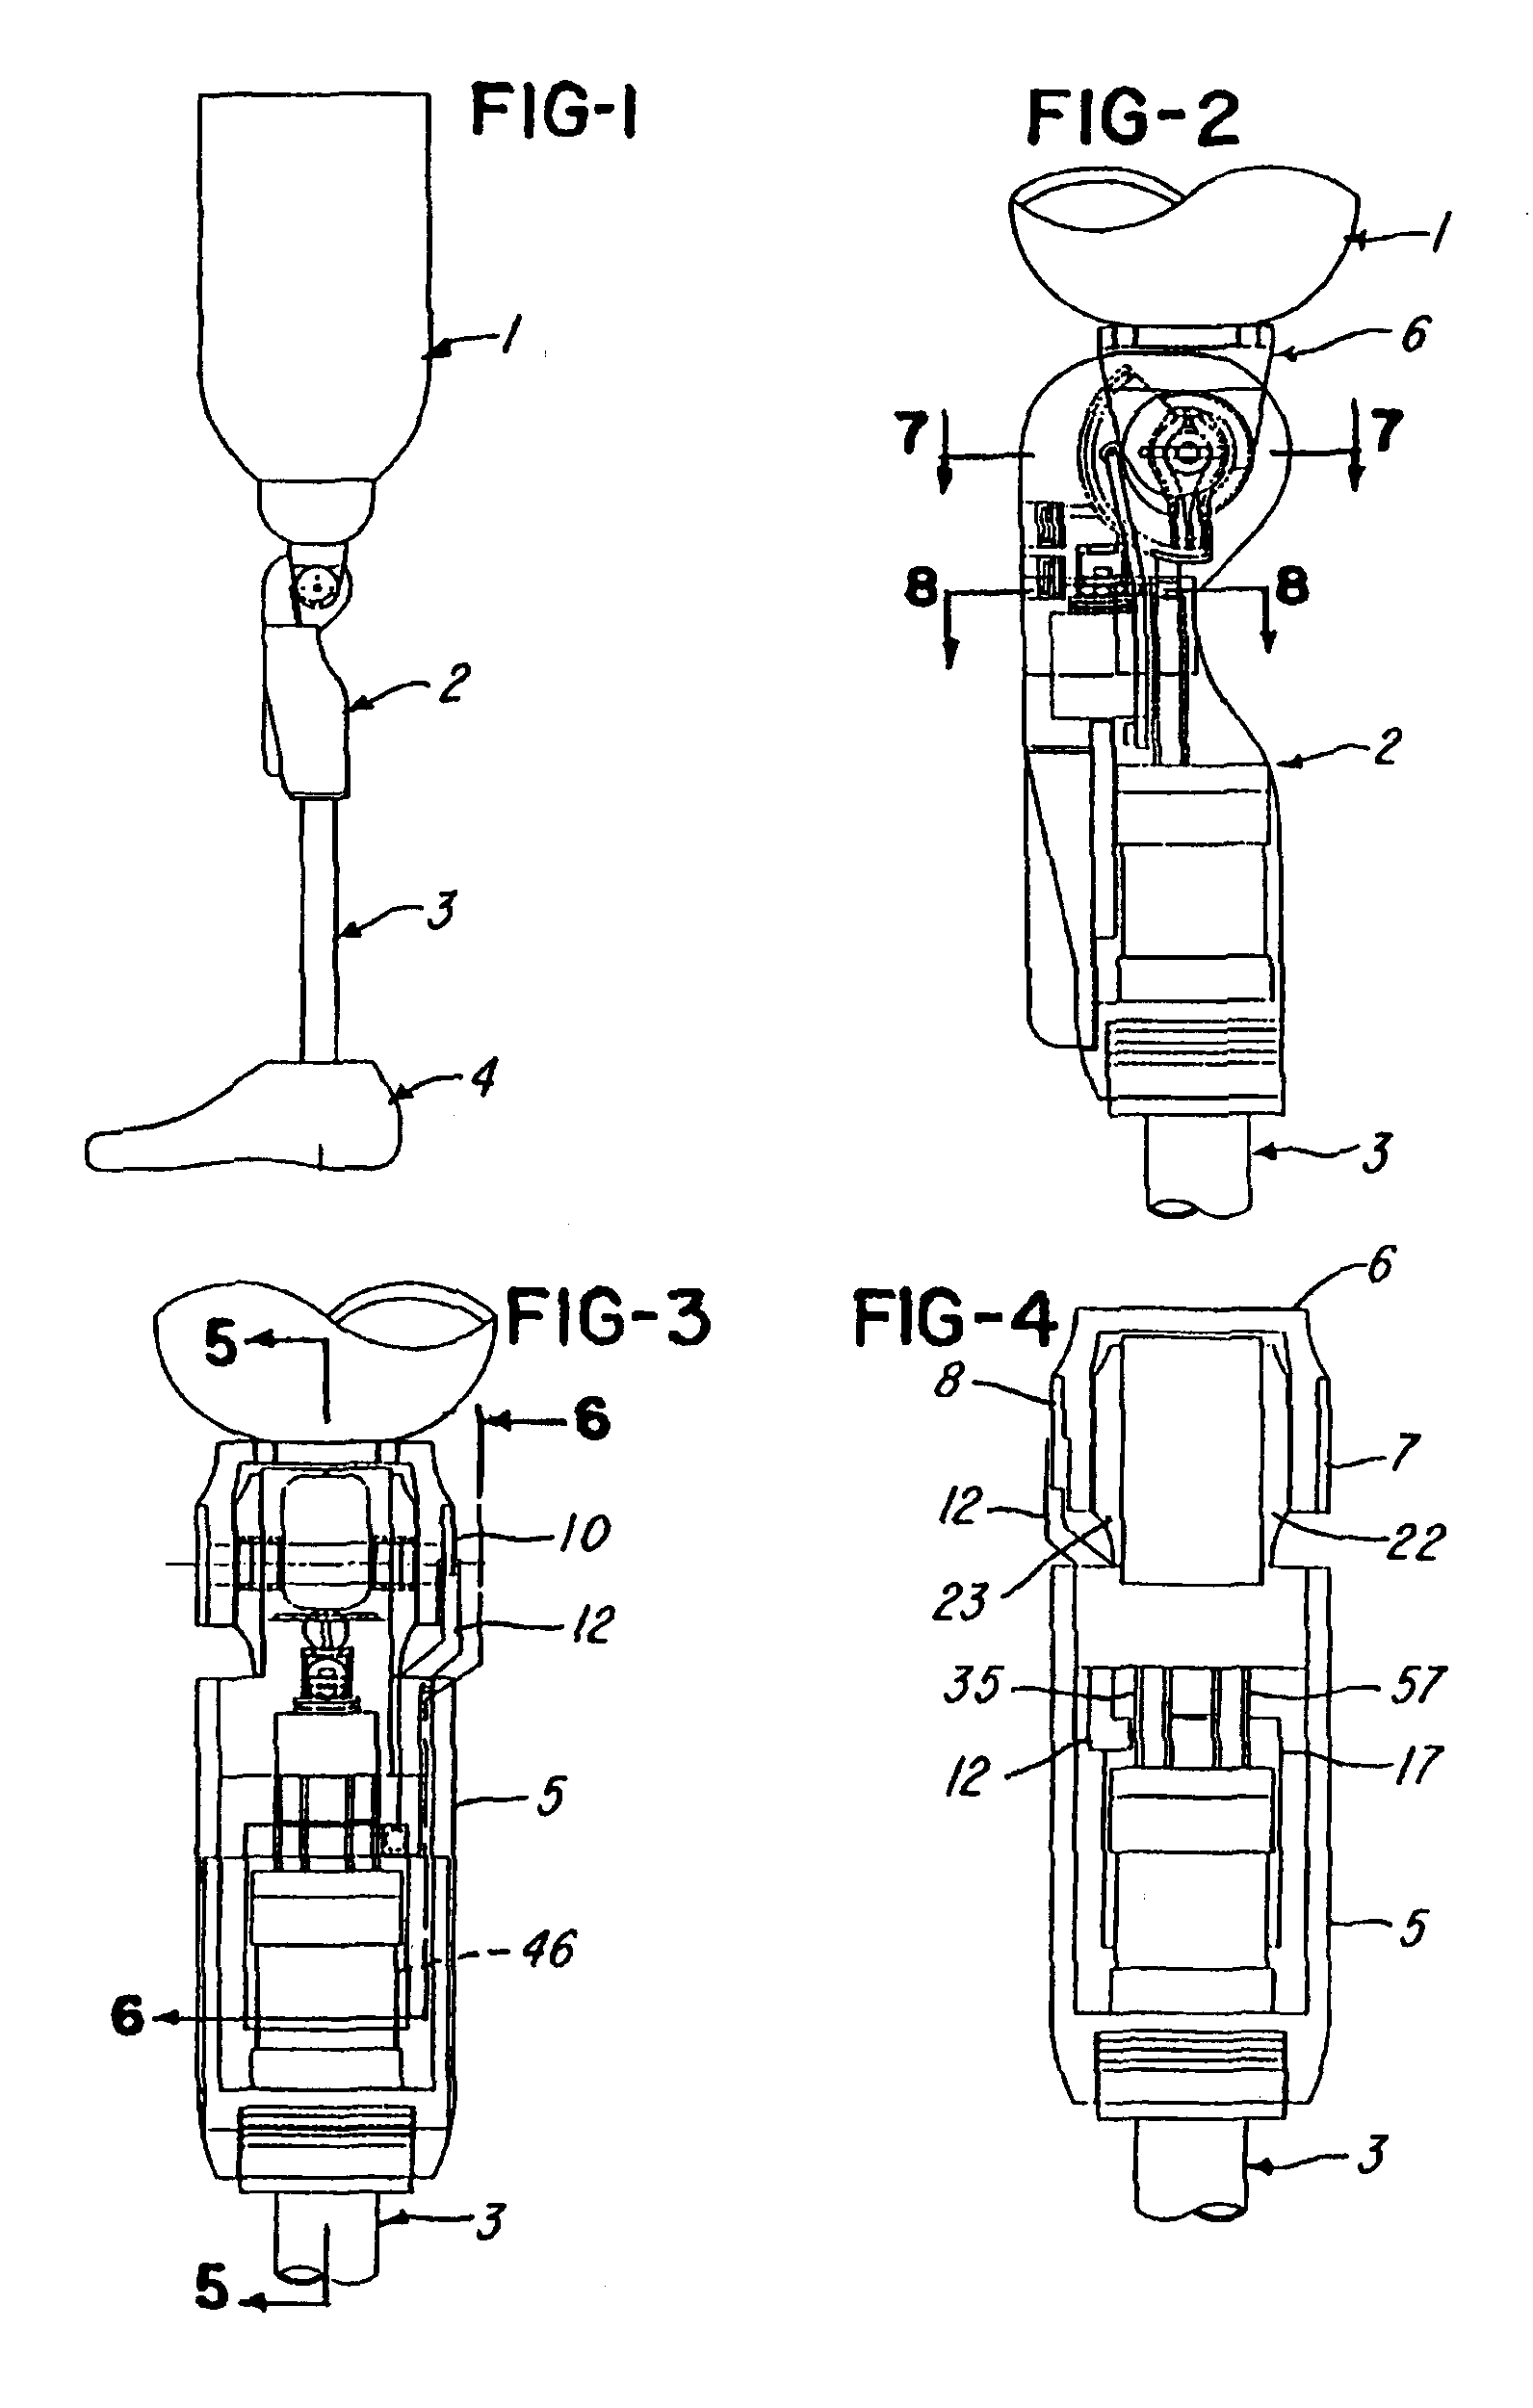 Computer controlled hydraulic resistance device for a prosthesis and other apparatus